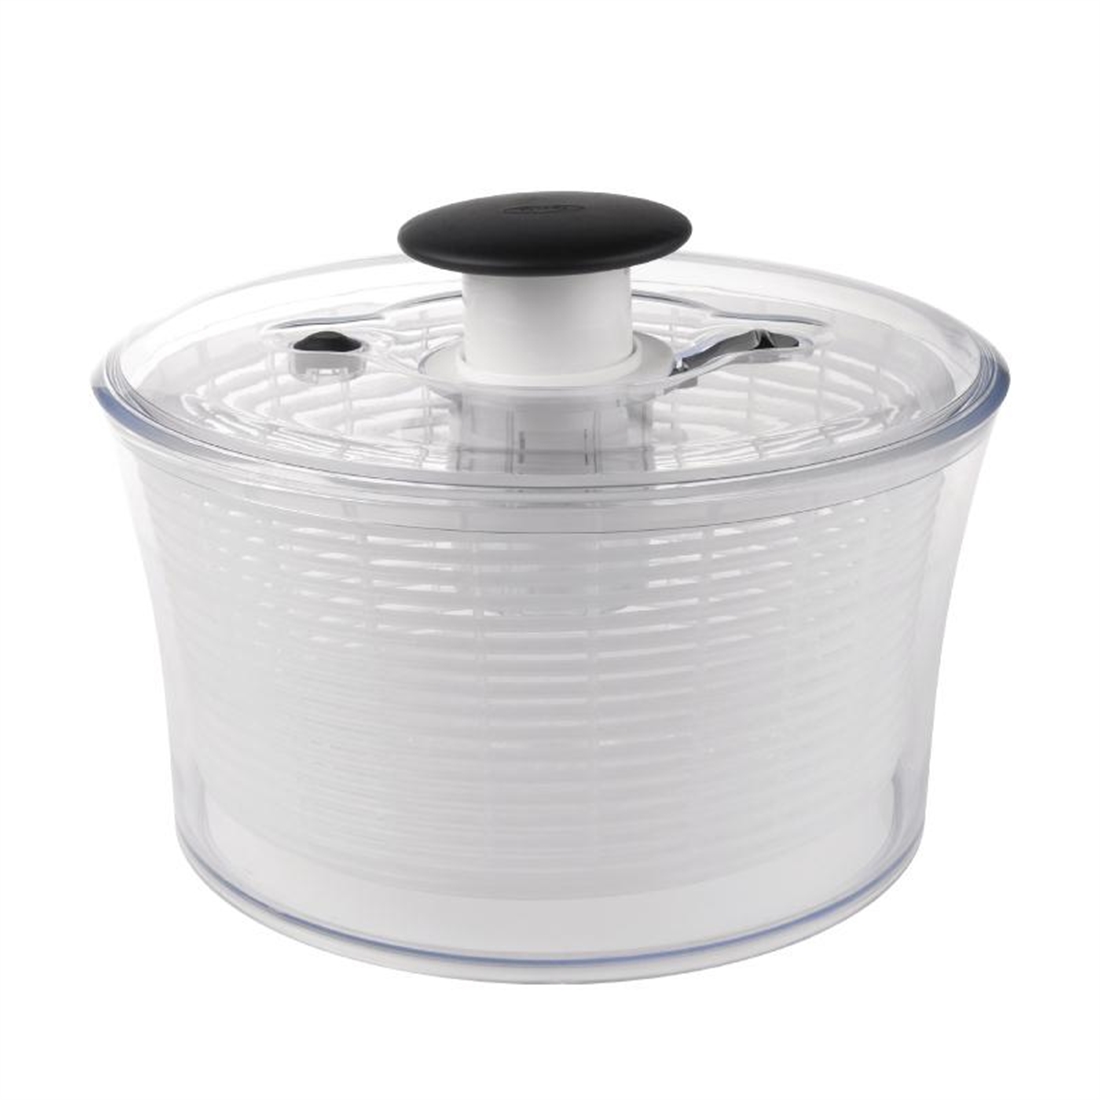 OXO Good Grips Salad and Herb Spinner